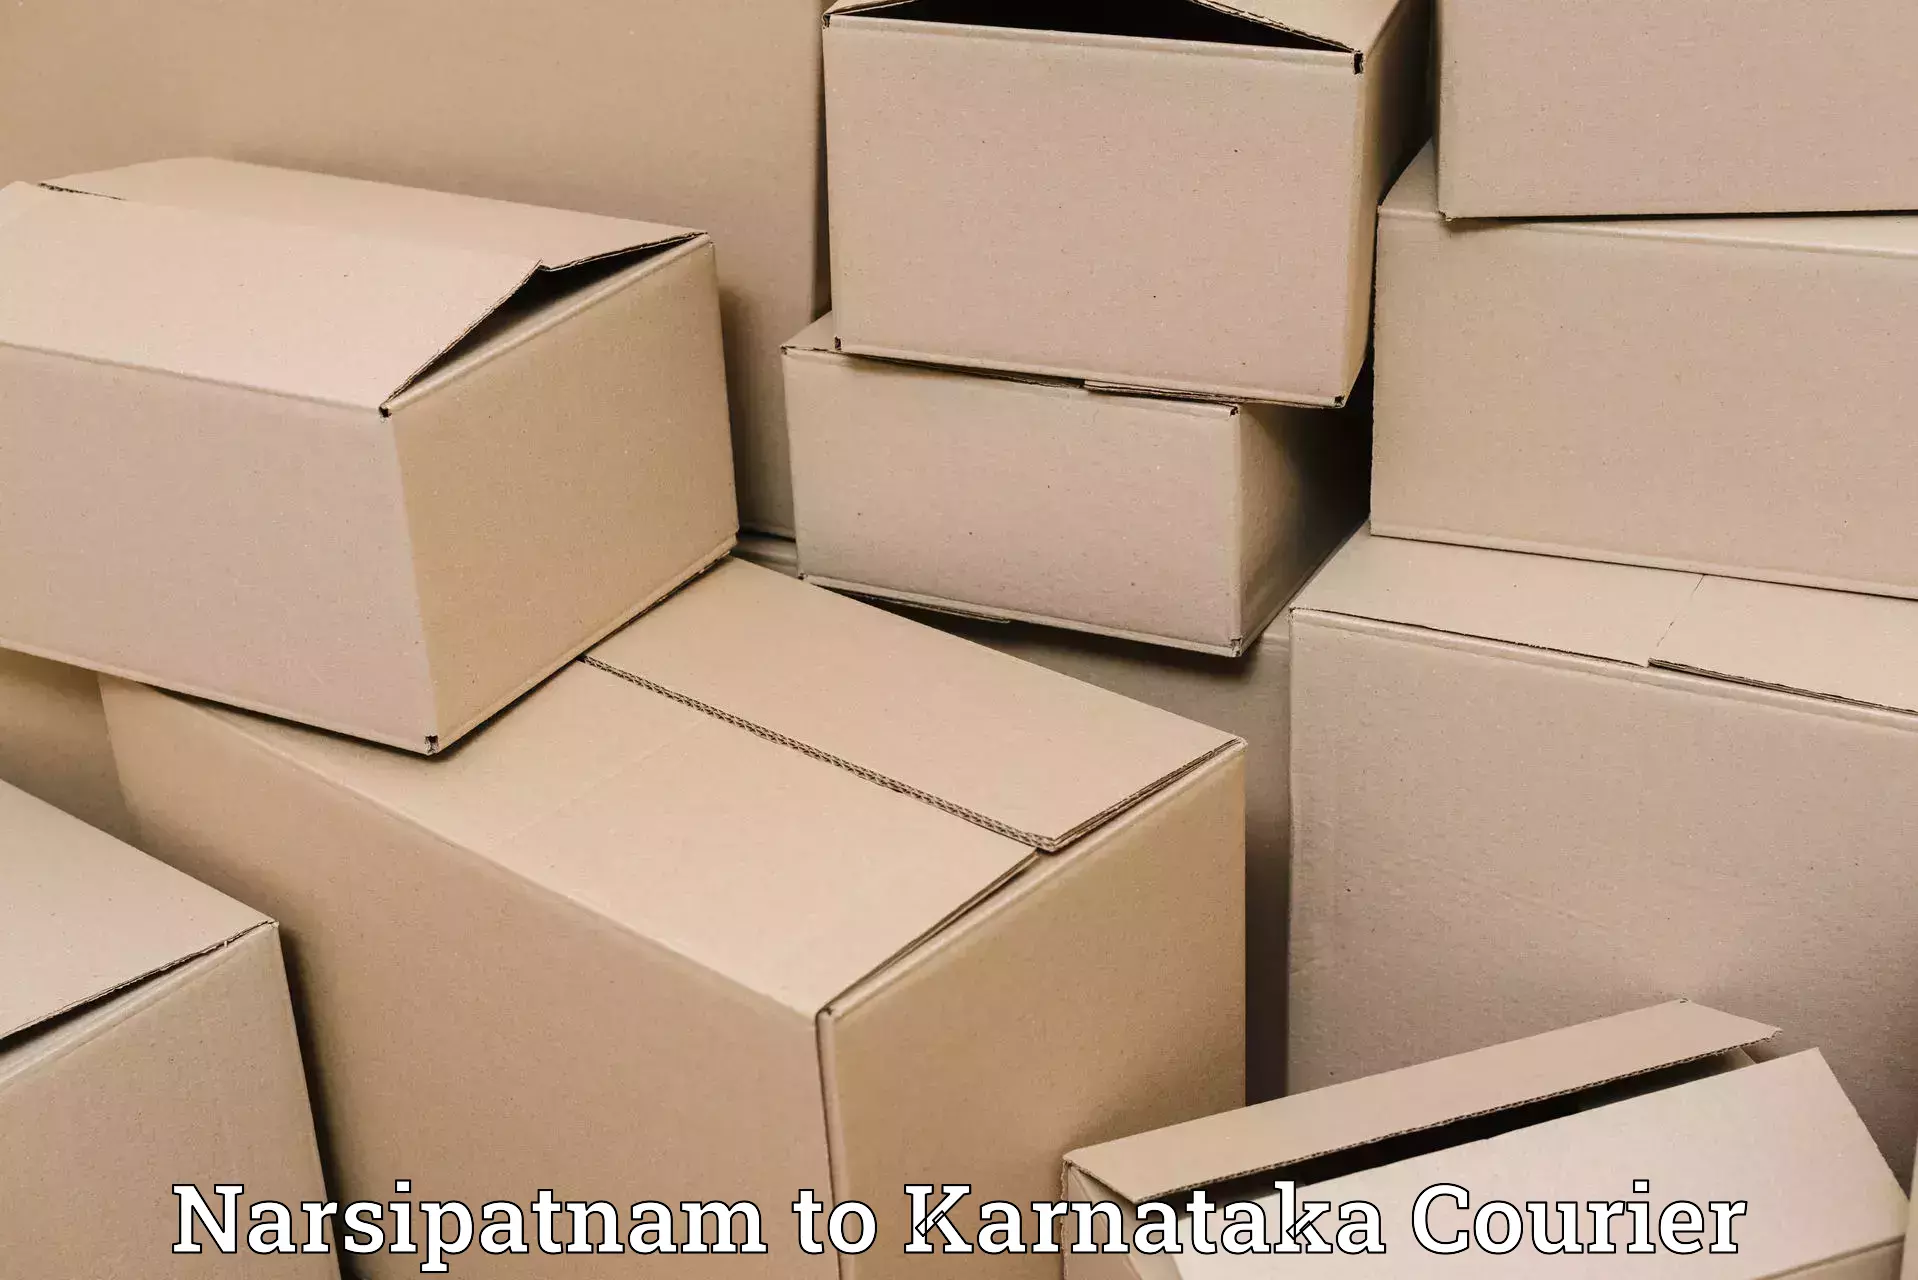 Package delivery network Narsipatnam to Athani